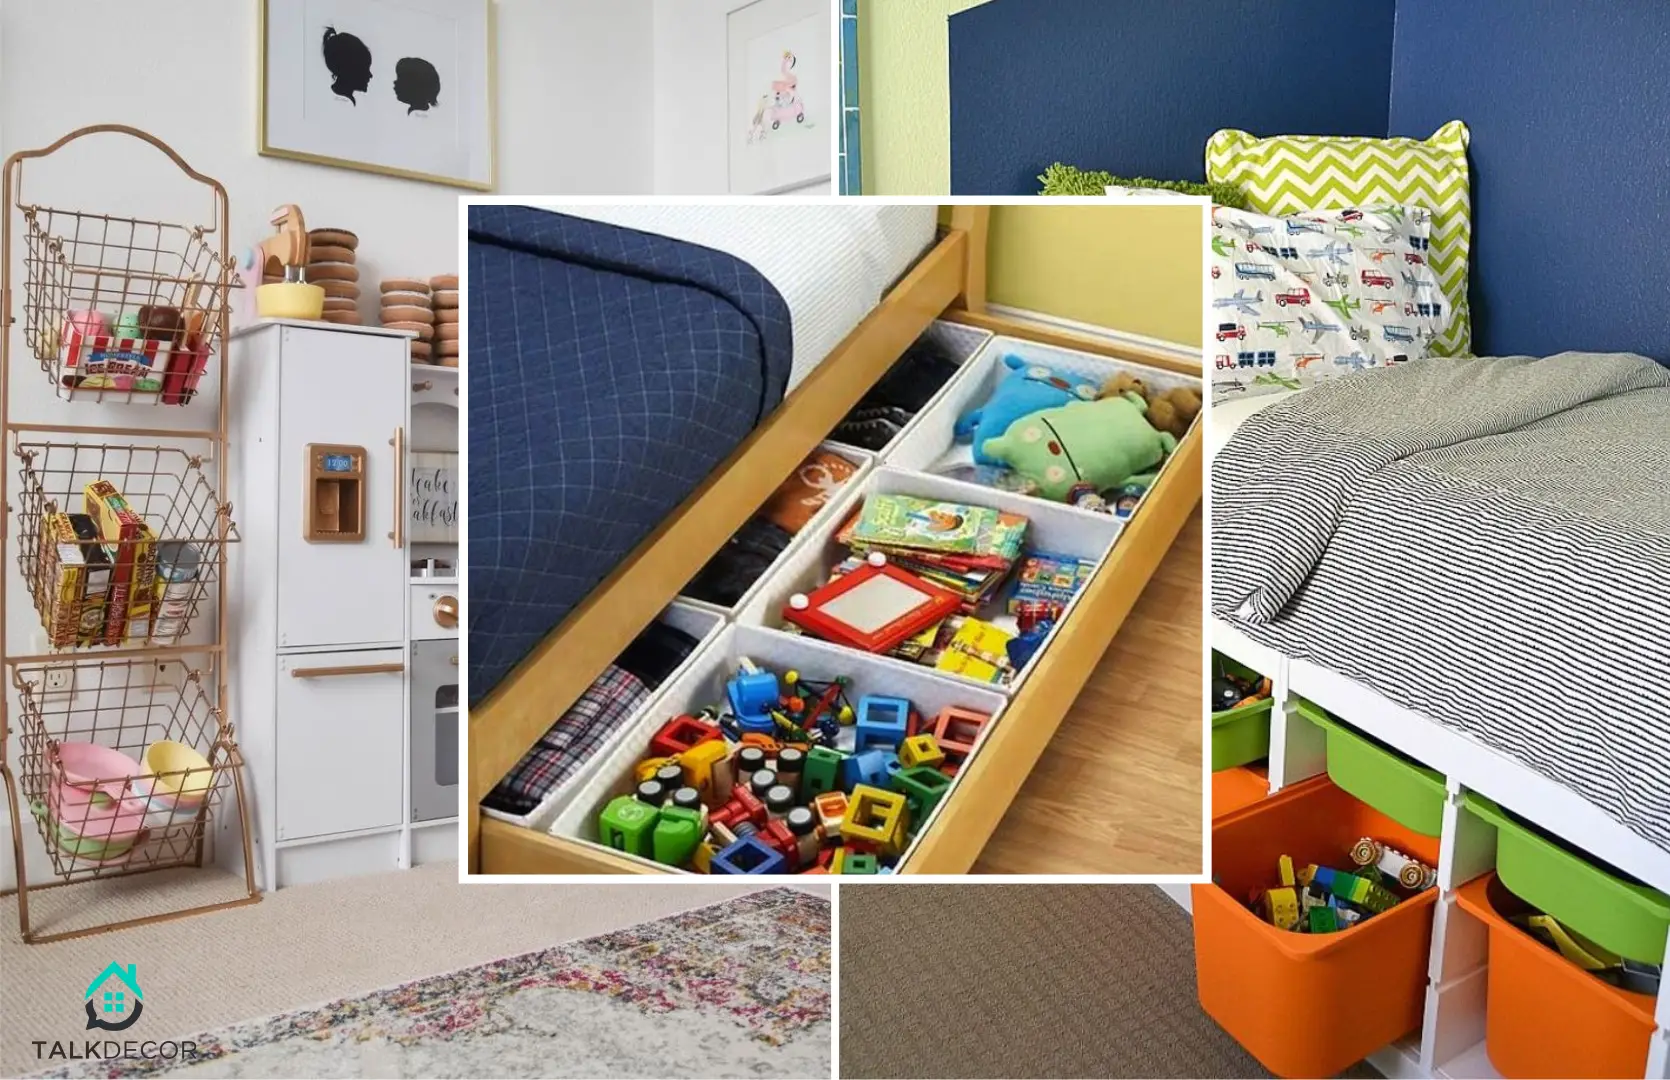 These 10 Bedroom Organization Ideas Will Make Your Children Excited